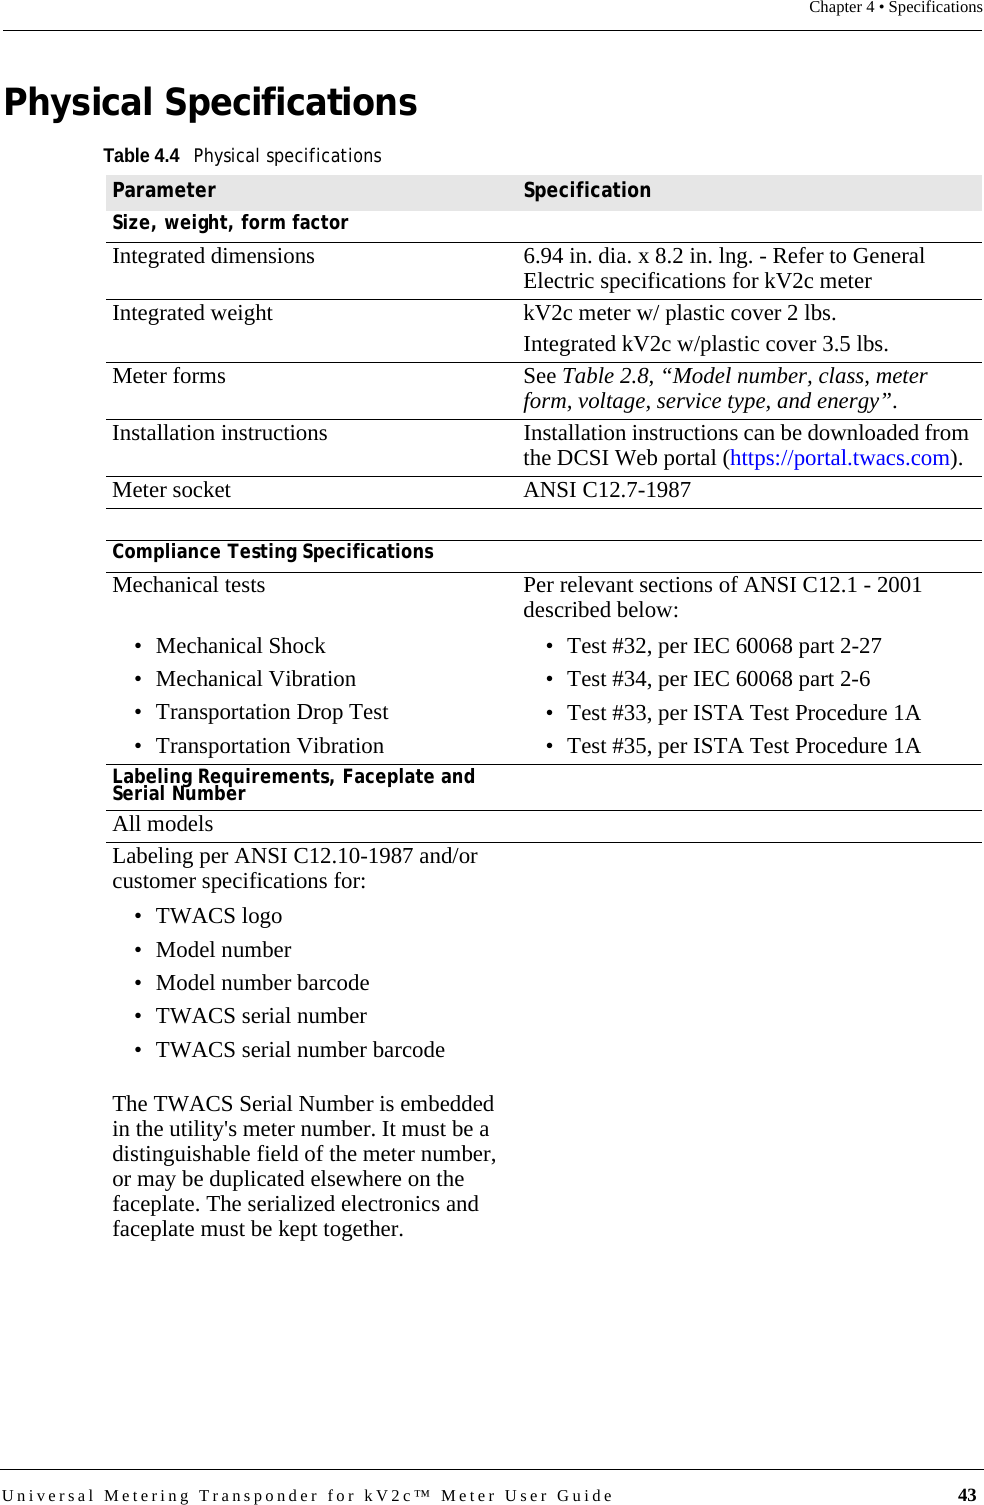 Universal Metering Transponder for kV2c™ Meter User Guide  43Chapter 4 • SpecificationsPhysical SpecificationsTable 4.4Physical specificationsParameter SpecificationSize, weight, form factorIntegrated dimensions 6.94 in. dia. x 8.2 in. lng. - Refer to General Electric specifications for kV2c meter Integrated weight kV2c meter w/ plastic cover 2 lbs. Integrated kV2c w/plastic cover 3.5 lbs.Meter forms See Table 2.8, “Model number, class, meter form, voltage, service type, and energy”.Installation instructions Installation instructions can be downloaded fromthe DCSI Web portal (https://portal.twacs.com). Meter socket ANSI C12.7-1987 Compliance Testing SpecificationsMechanical tests• Mechanical Shock• Mechanical Vibration• Transportation Drop Test• Transportation VibrationPer relevant sections of ANSI C12.1 - 2001 described below:• Test #32, per IEC 60068 part 2-27• Test #34, per IEC 60068 part 2-6• Test #33, per ISTA Test Procedure 1A• Test #35, per ISTA Test Procedure 1ALabeling Requirements, Faceplate and Serial NumberAll modelsLabeling per ANSI C12.10-1987 and/or customer specifications for:•TWACS logo• Model number• Model number barcode• TWACS serial number• TWACS serial number barcodeThe TWACS Serial Number is embedded in the utility&apos;s meter number. It must be a distinguishable field of the meter number, or may be duplicated elsewhere on the faceplate. The serialized electronics and faceplate must be kept together.